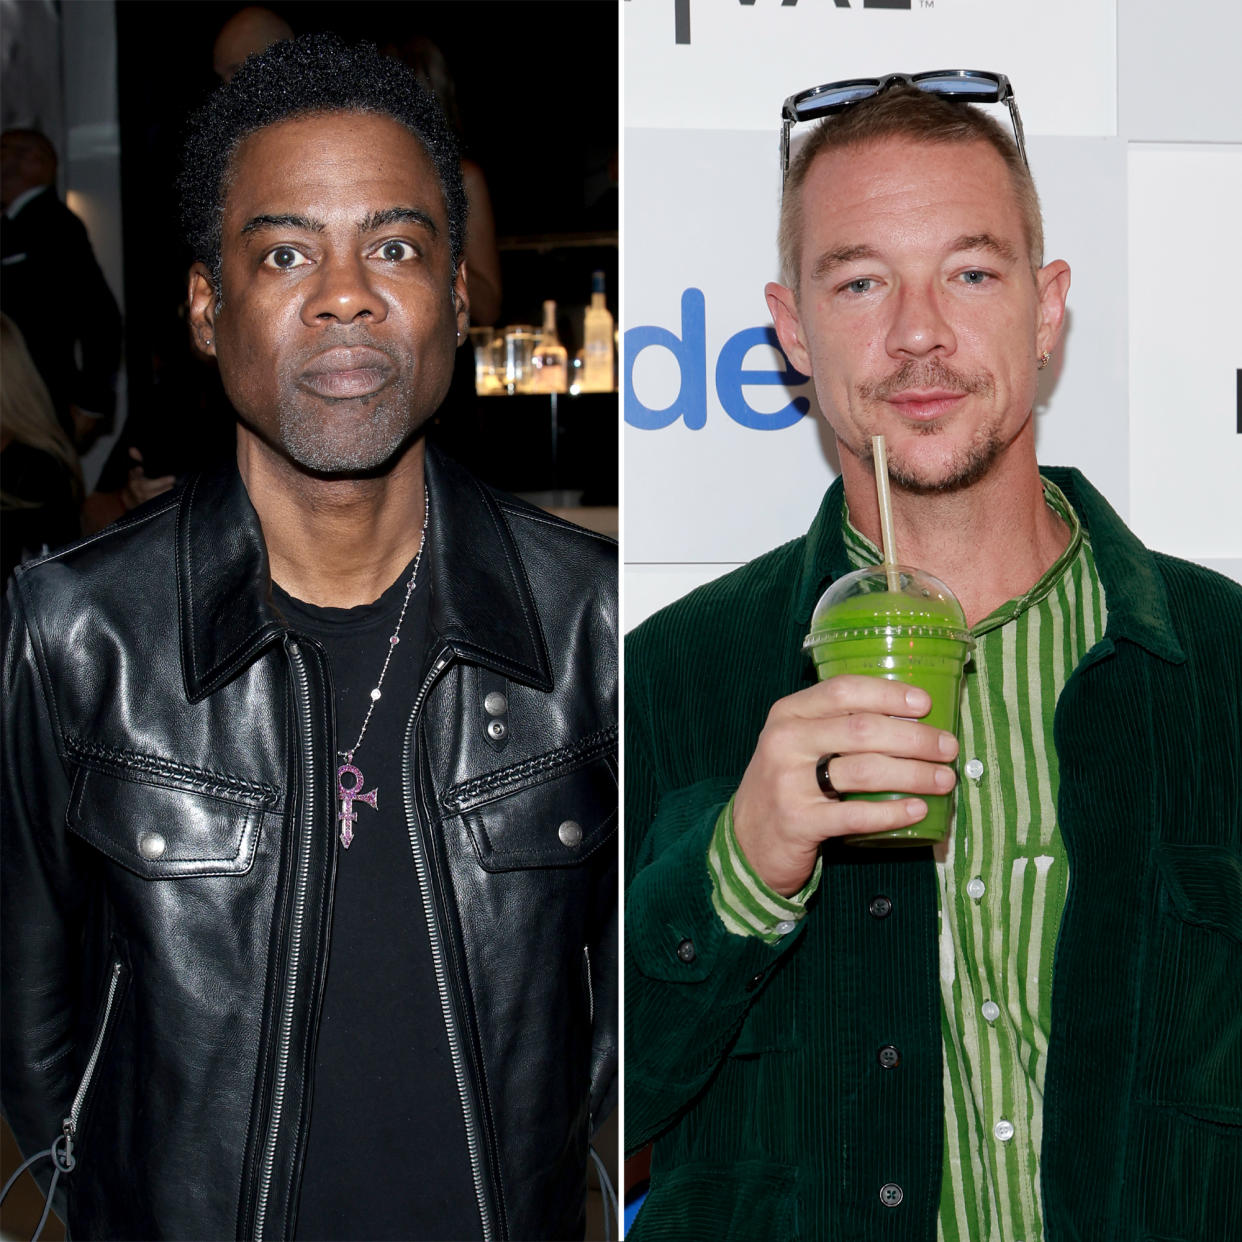 What-s Happening at Burning Man- Chris Rock and Diplo Escape and More